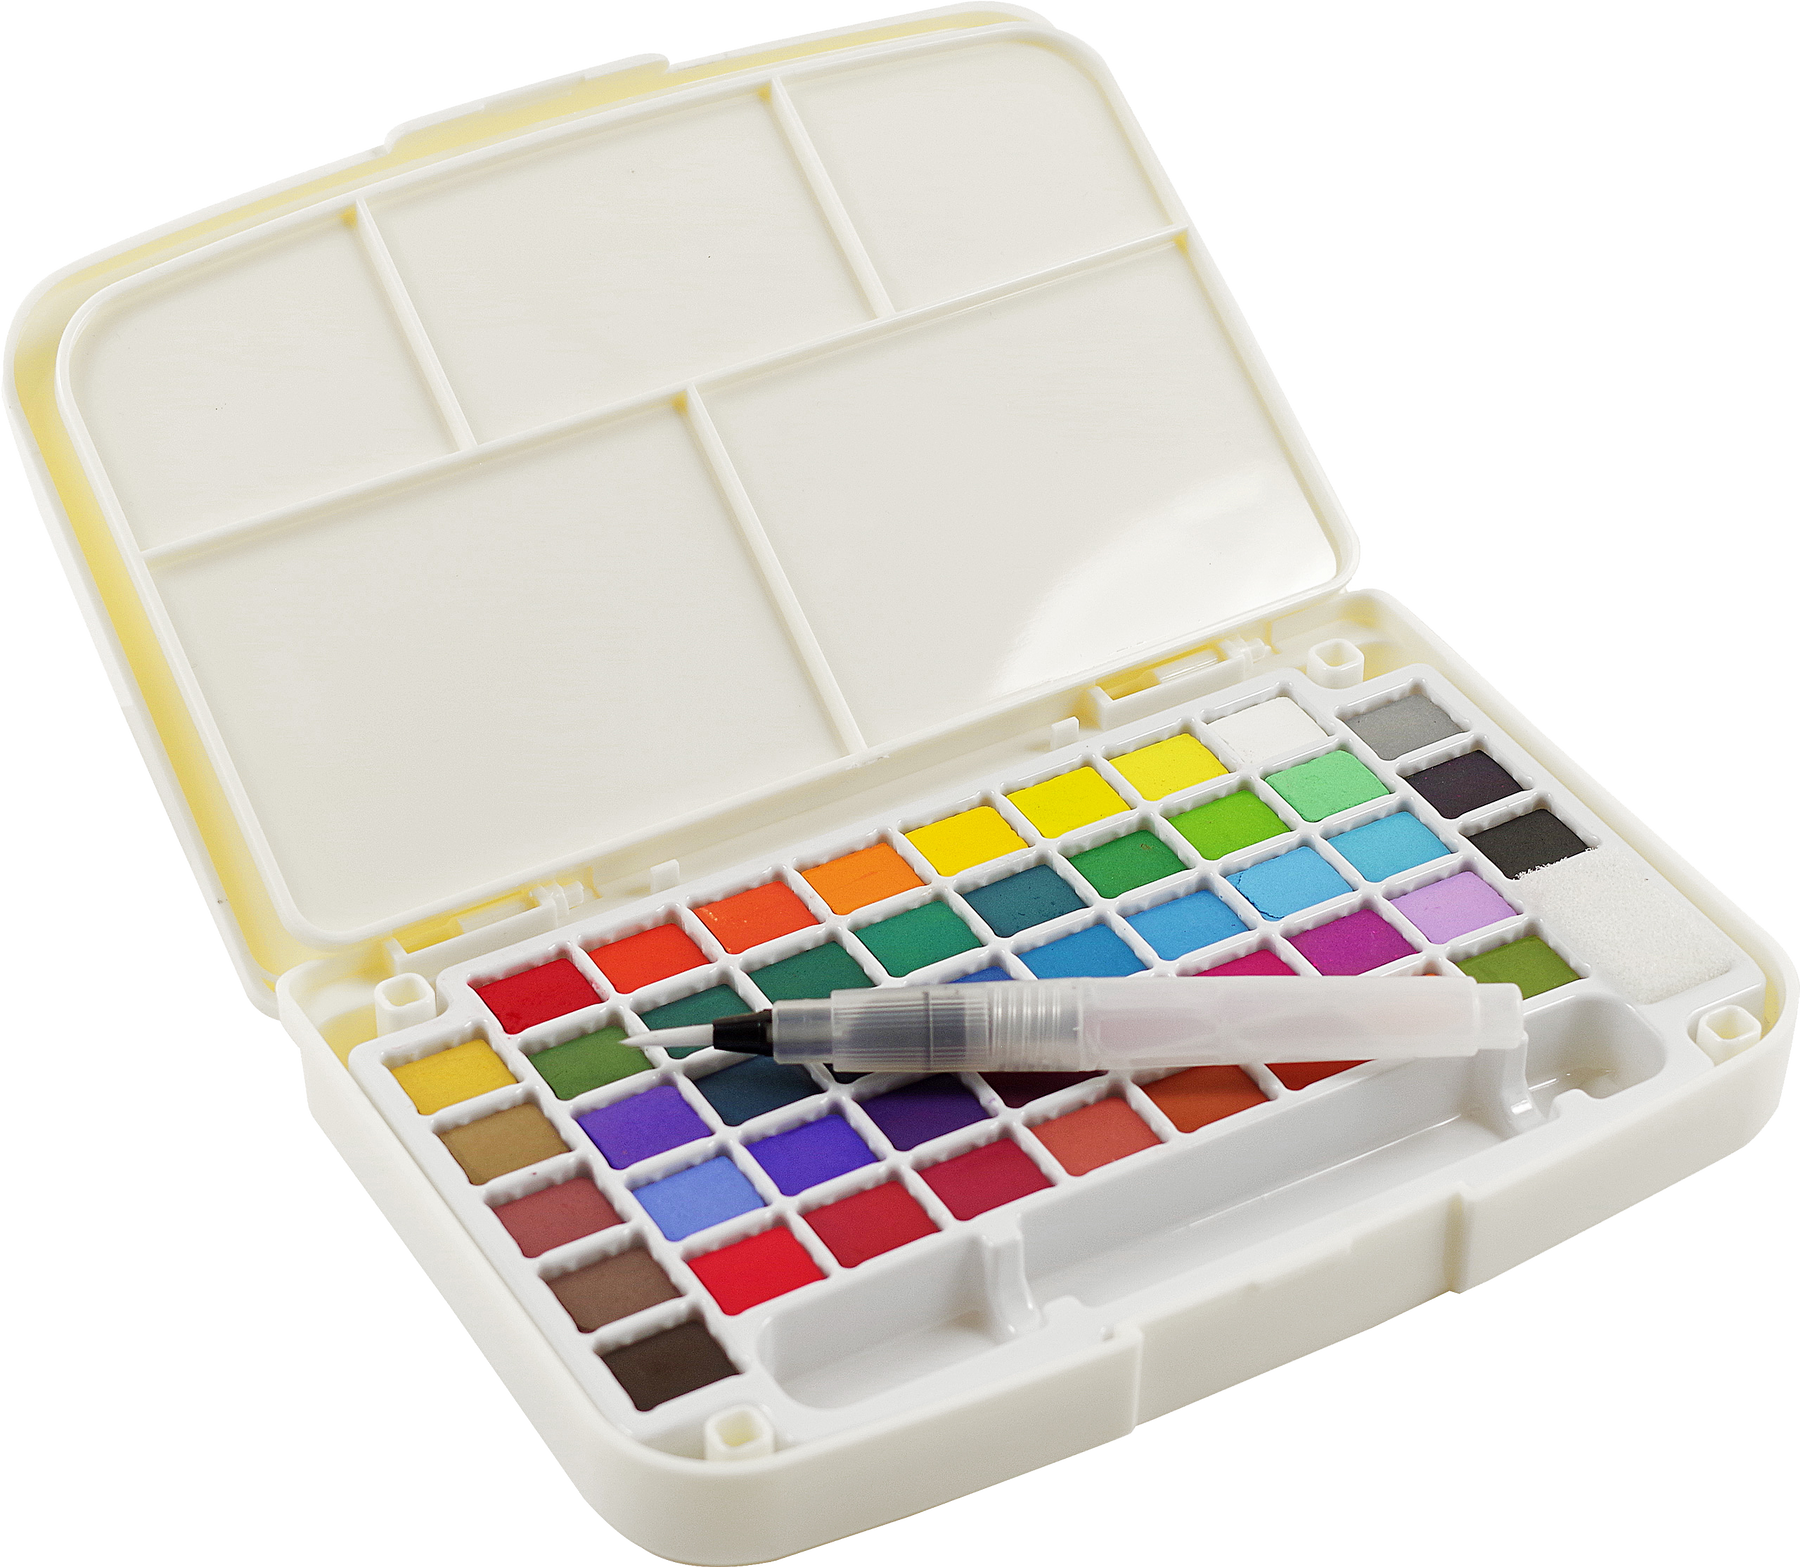  U.S. Art Supply 57-Piece Artist Watercolor Painting Set with  Field Studio Sketch Box Easel, 24 Watercolor Paint Colors, 22 Brushes, 6  Canvas Panels, 2 Watercolor Paper Pads, 2 Paint Palettes, Students 